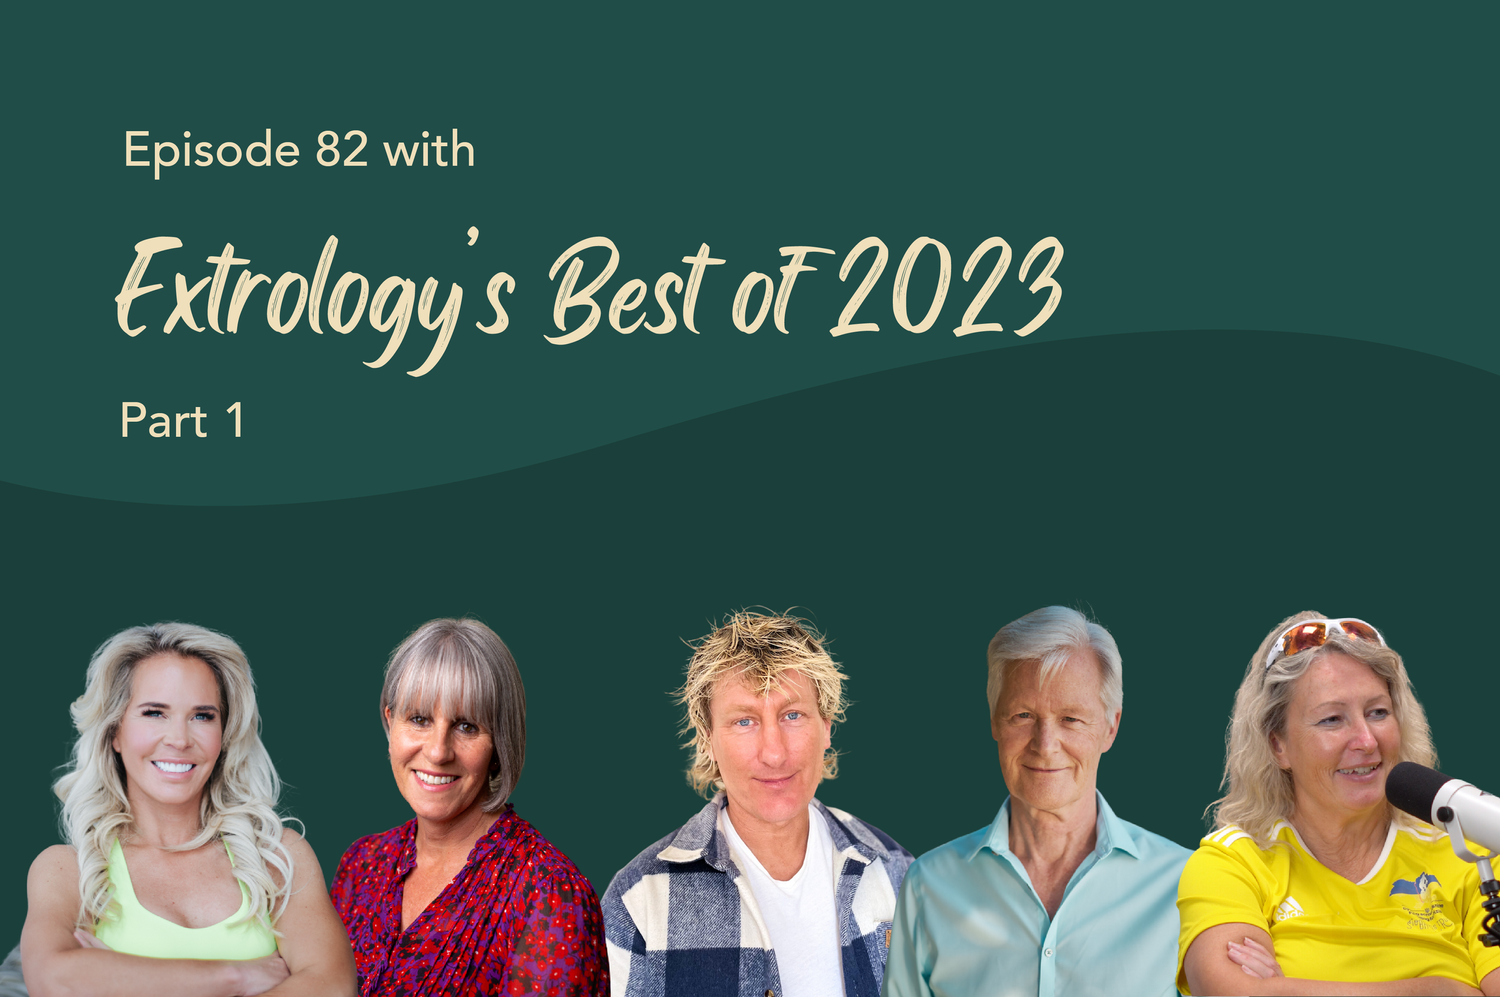 Extrology BEST OF 2023 podcast